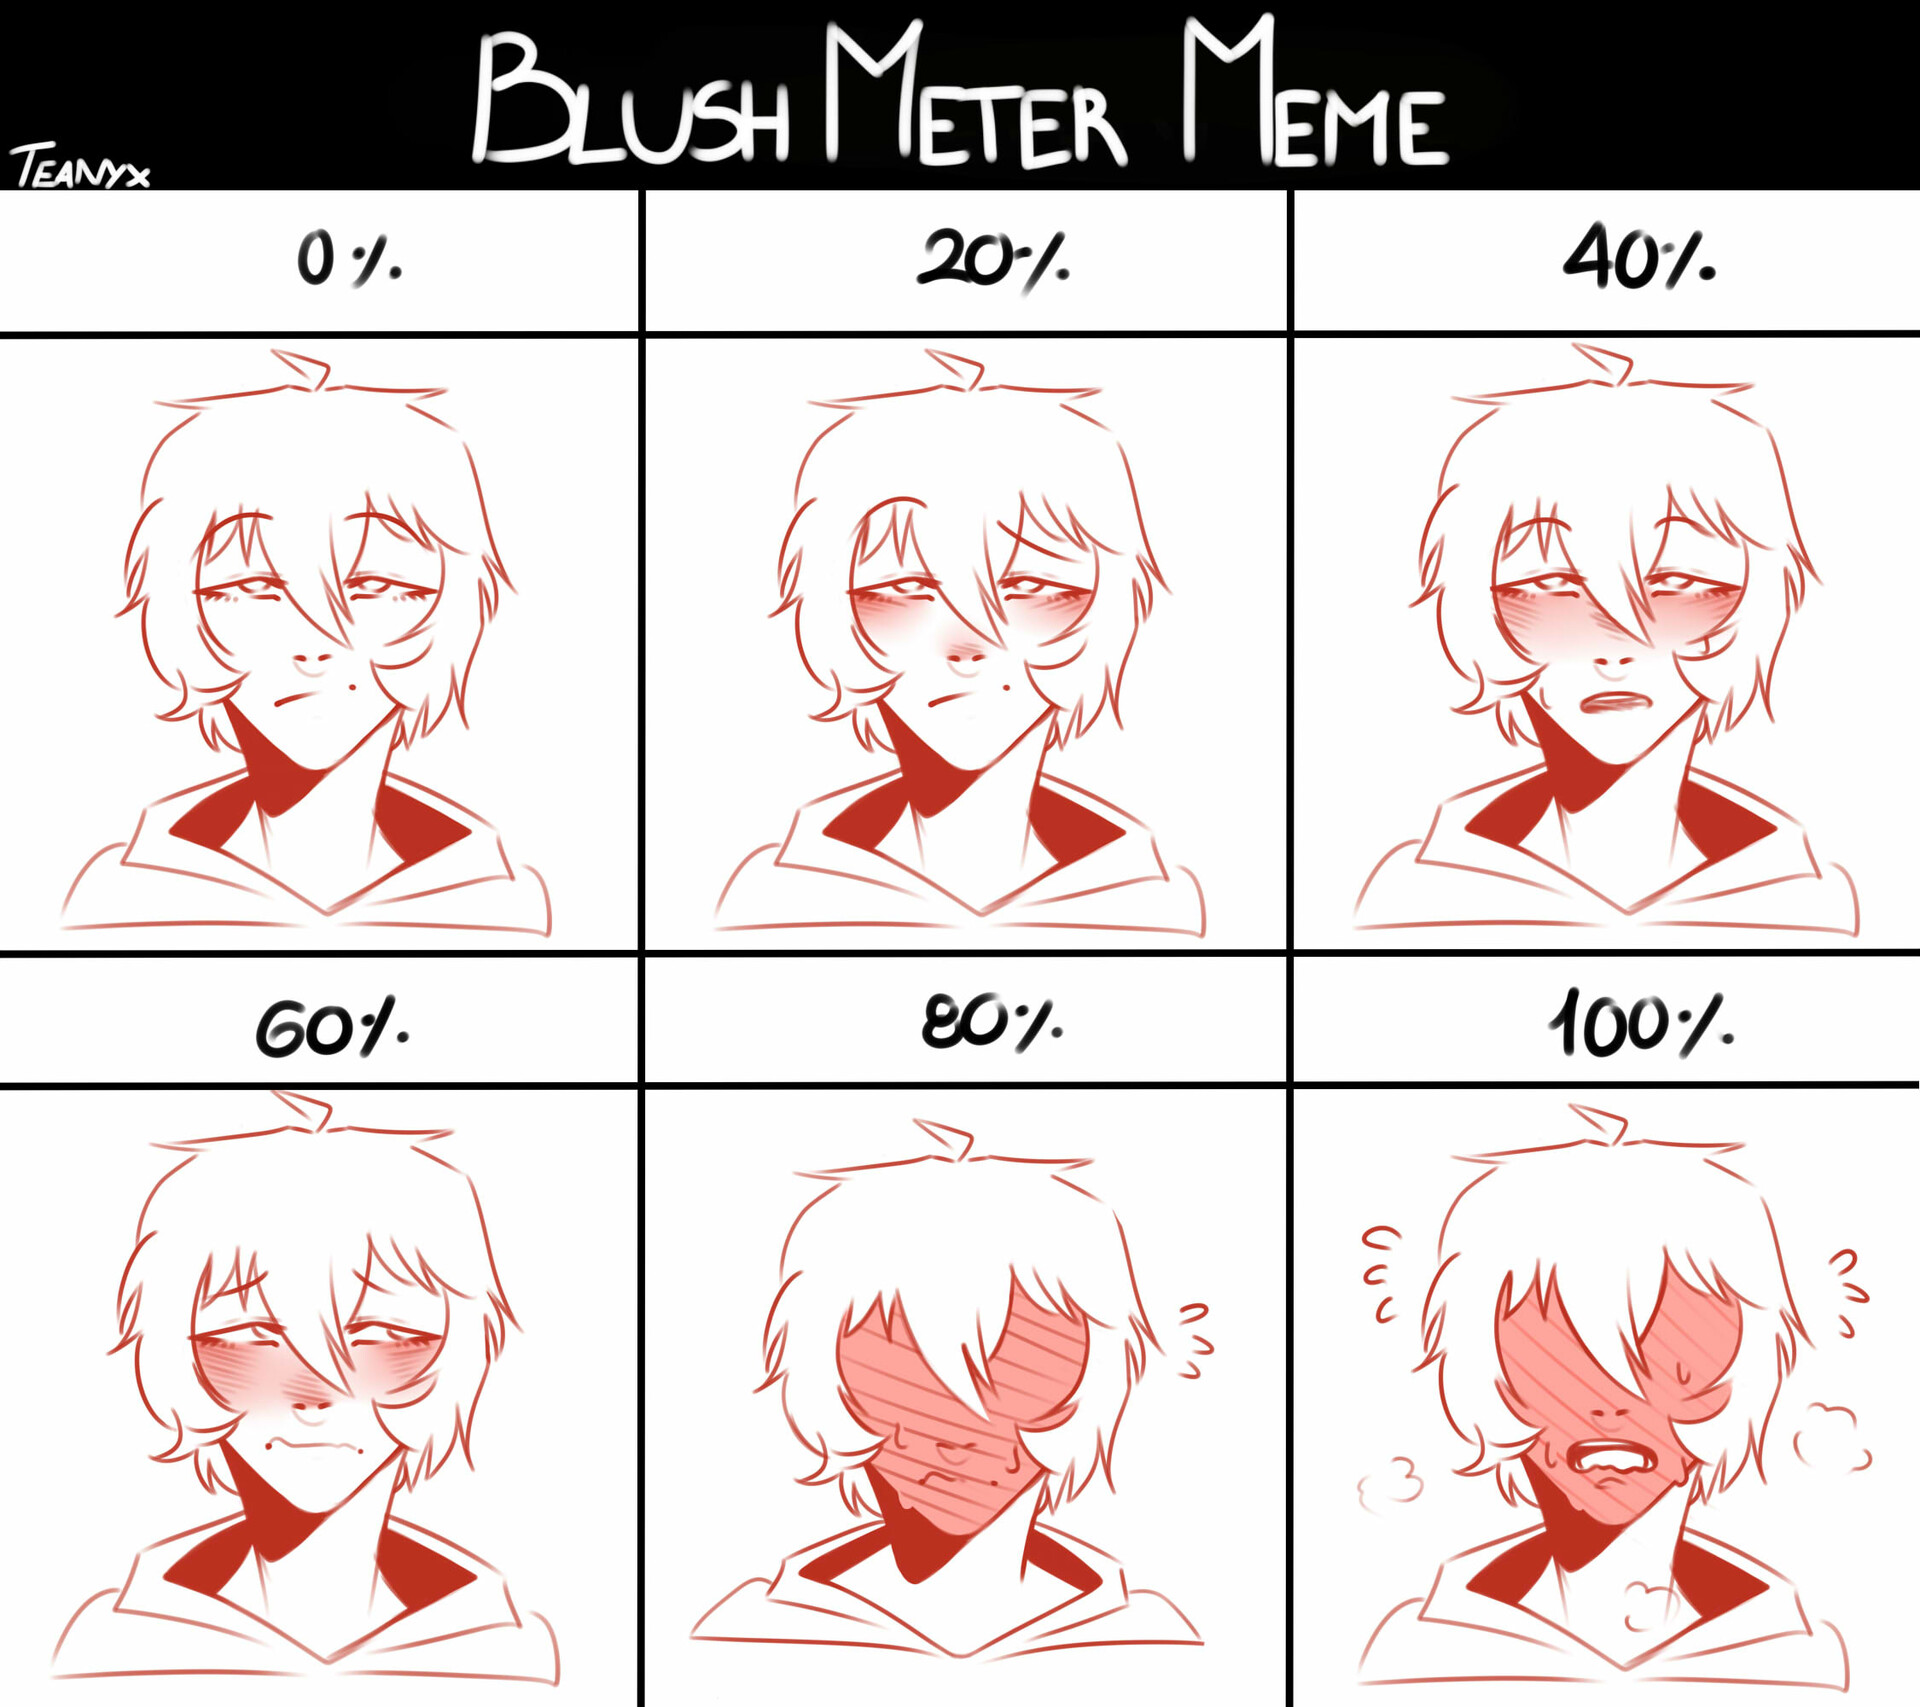 mocha on Twitter  I always wanted to do the blush meme  but i never had the art stamina UNTIL NOW   httpstcolLFn6lvnEP  Twitter